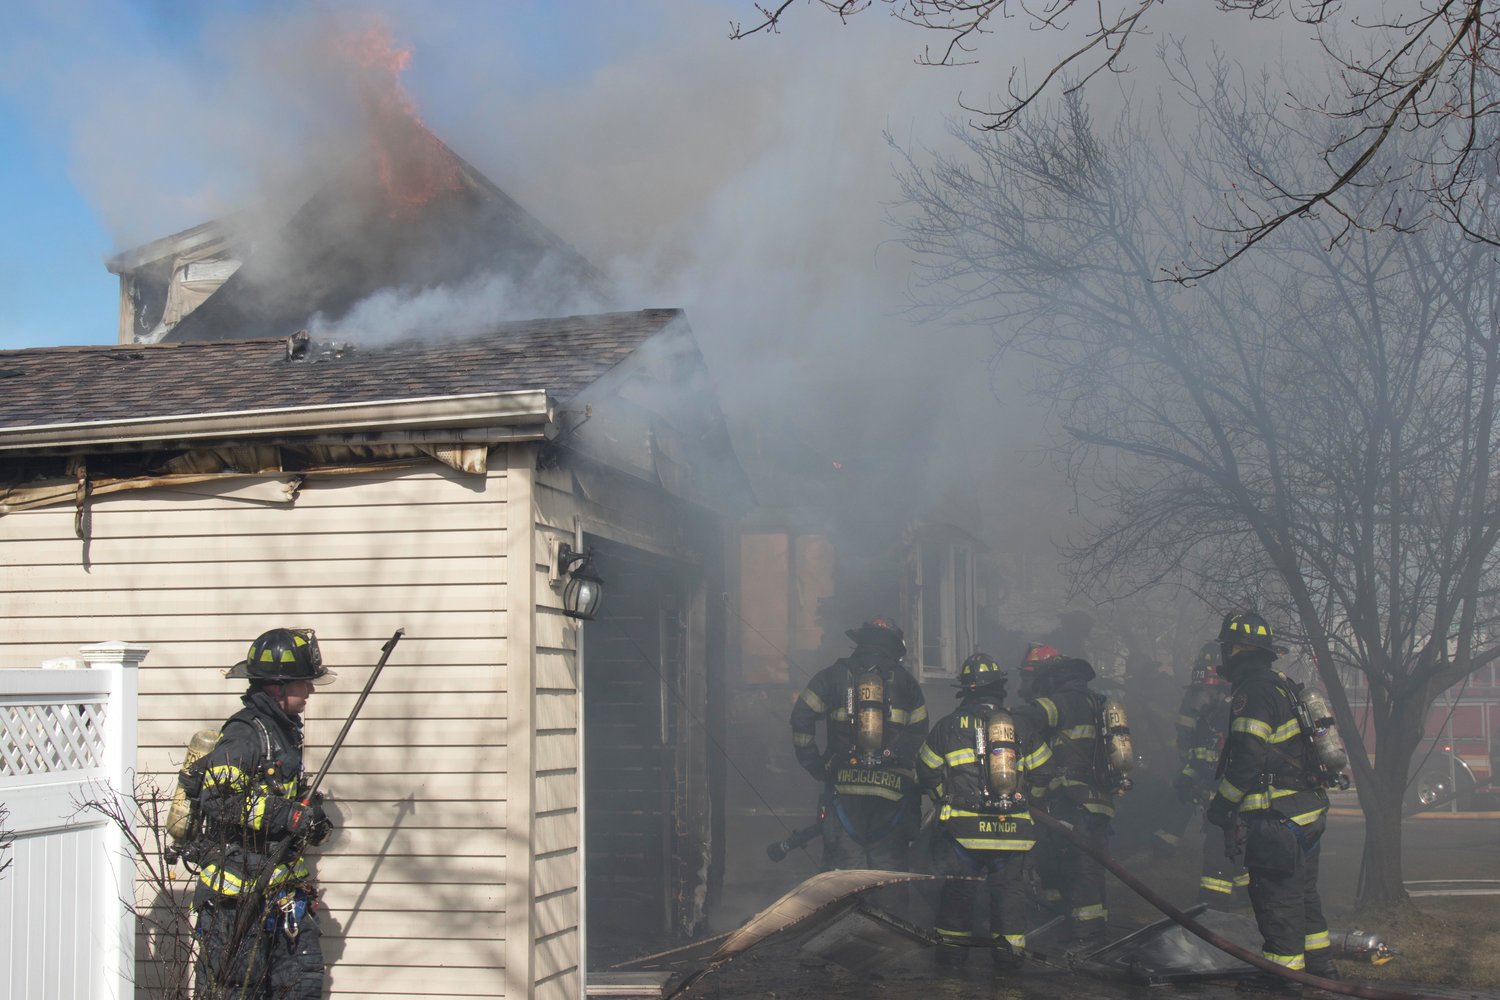 Bazarewski, along with her father and brother, helped extinguish an East Meadow house fire last month, sparing much of the home from destruction.